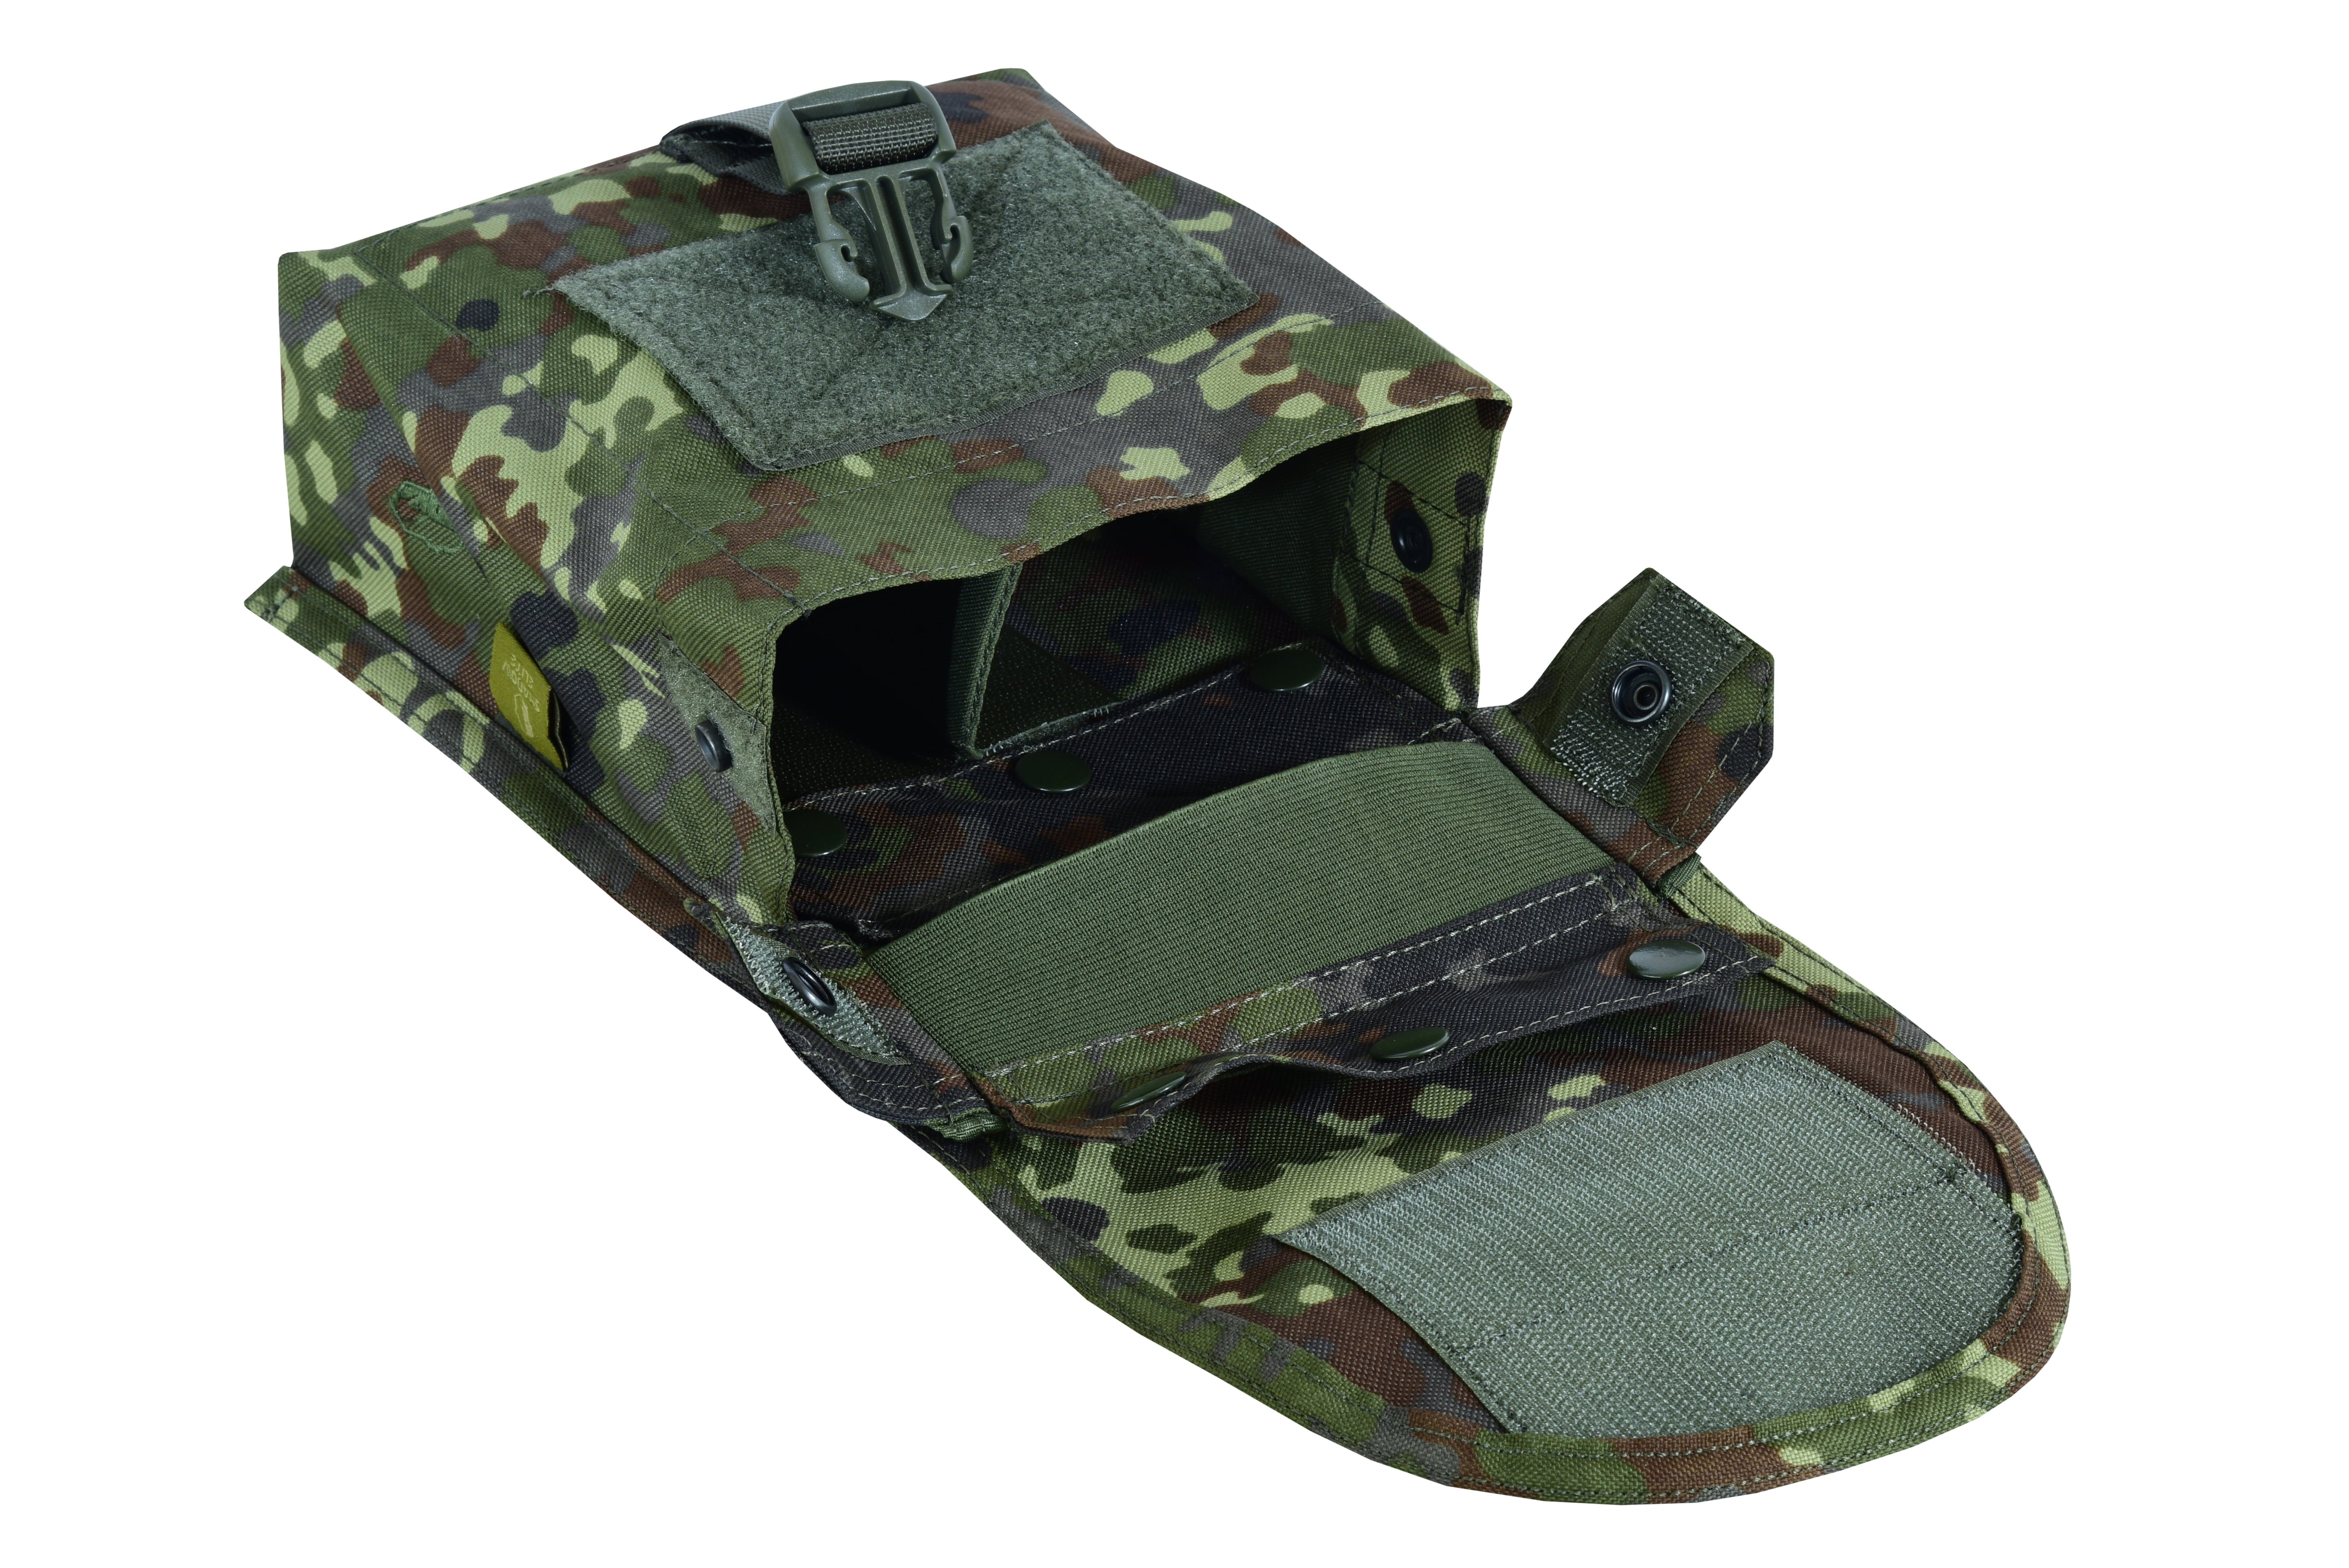 Shadow Strategic Camouflage LMG / SAW Pouch Color Flectarn inside view.